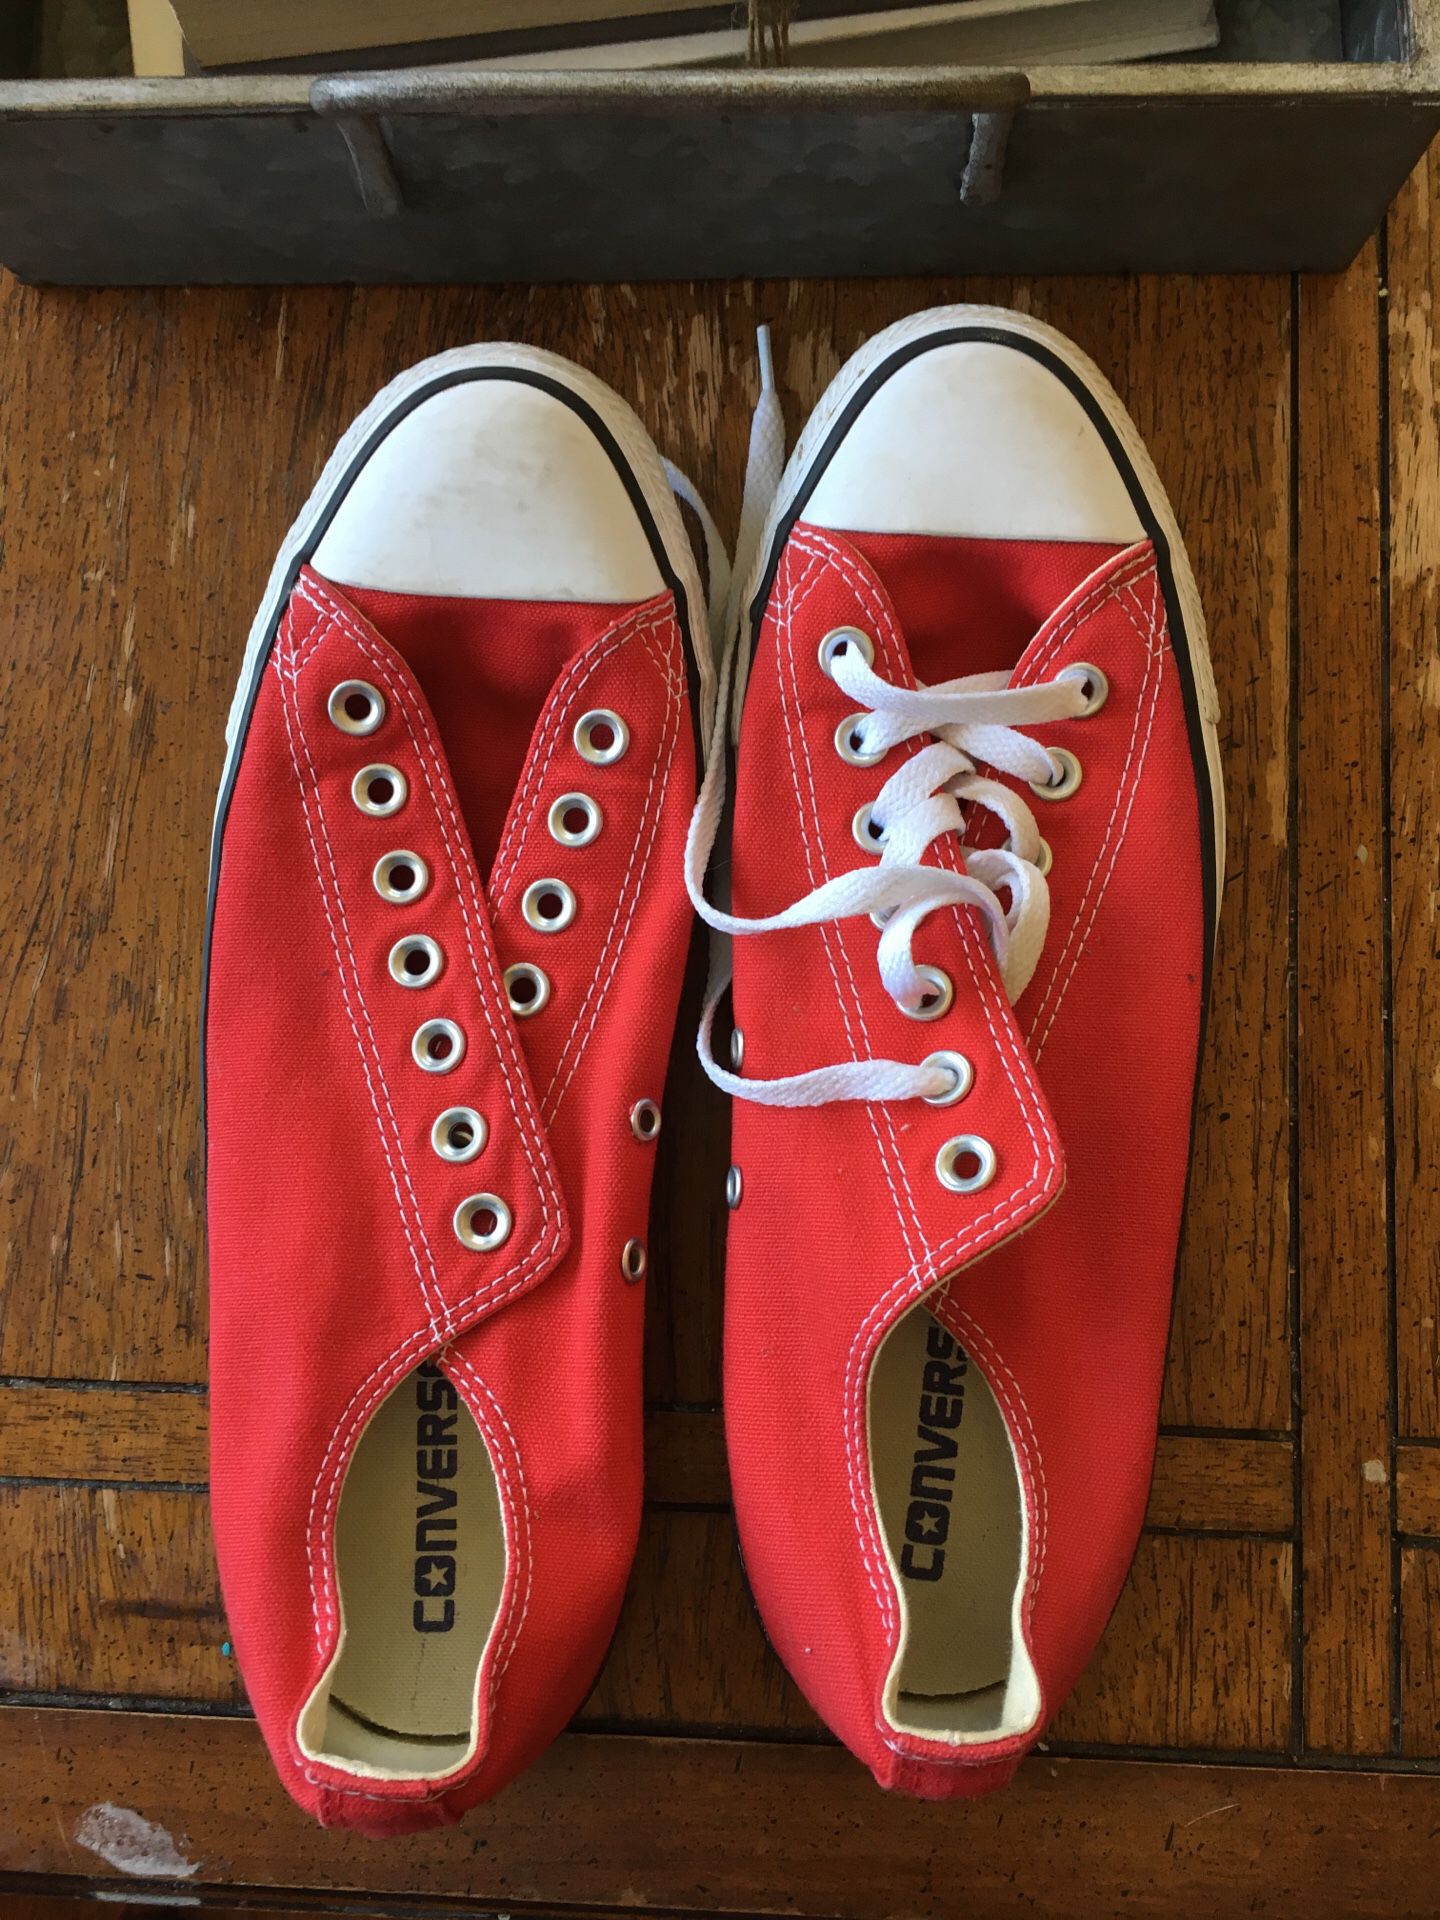 Red converse shoe